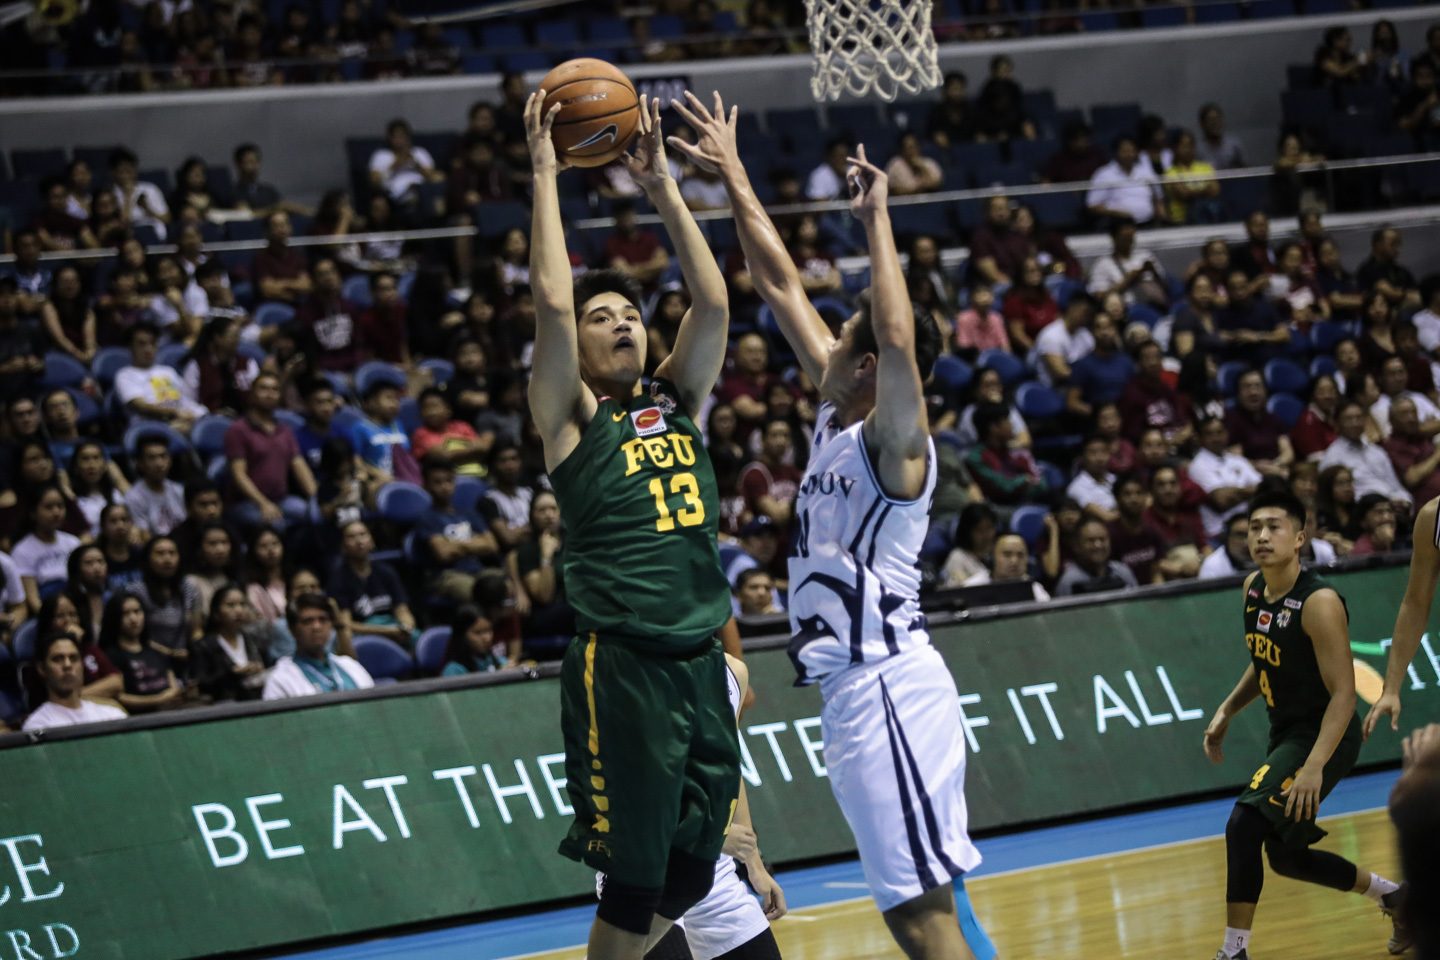 Tamaraws get last spot in Final 4 with win vs injury-plagued Falcons